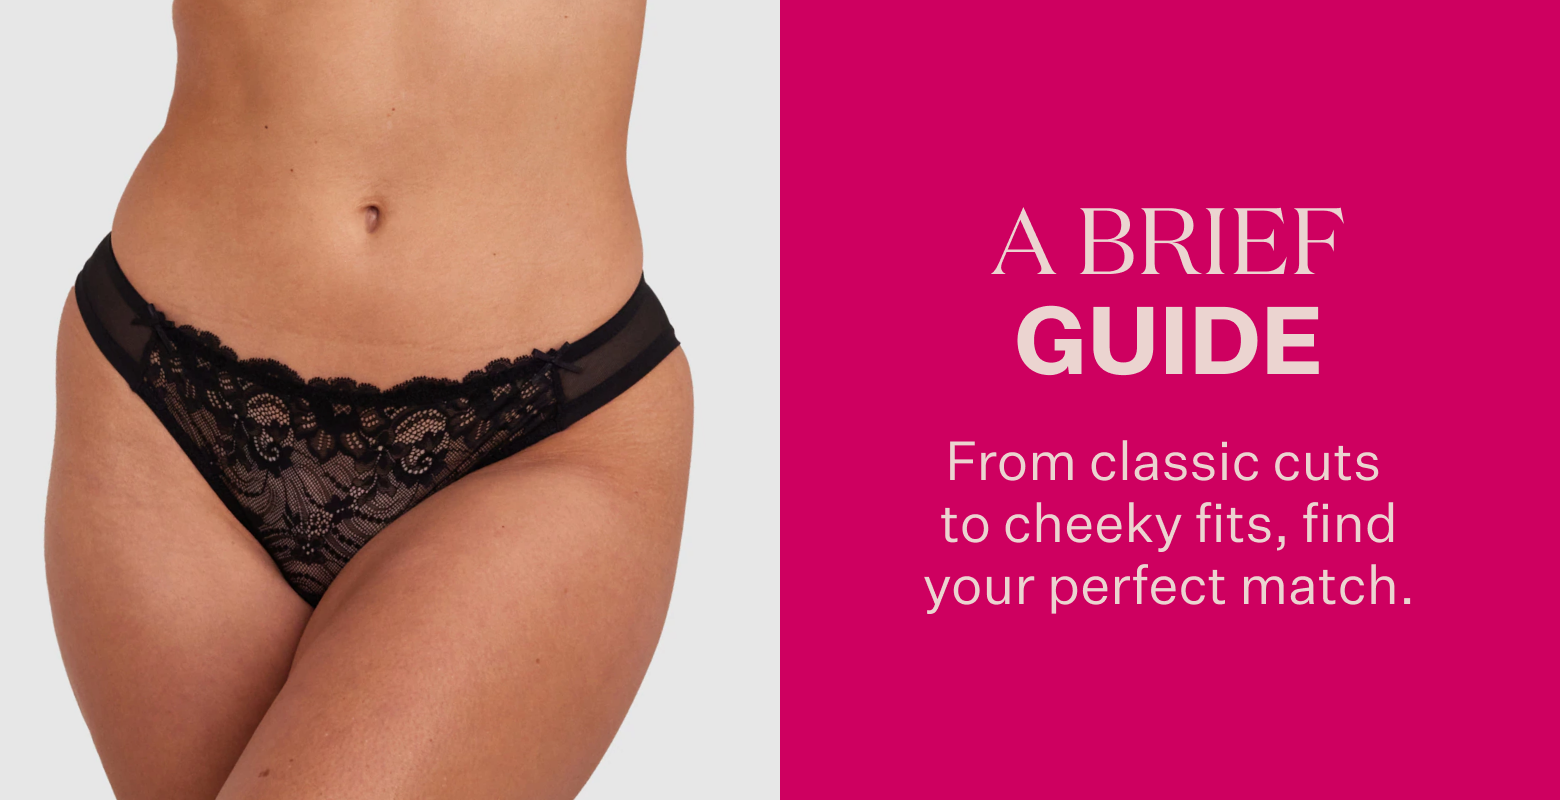 A Brief Guide. From classic cuts to cheeky fits, find your perfect match.